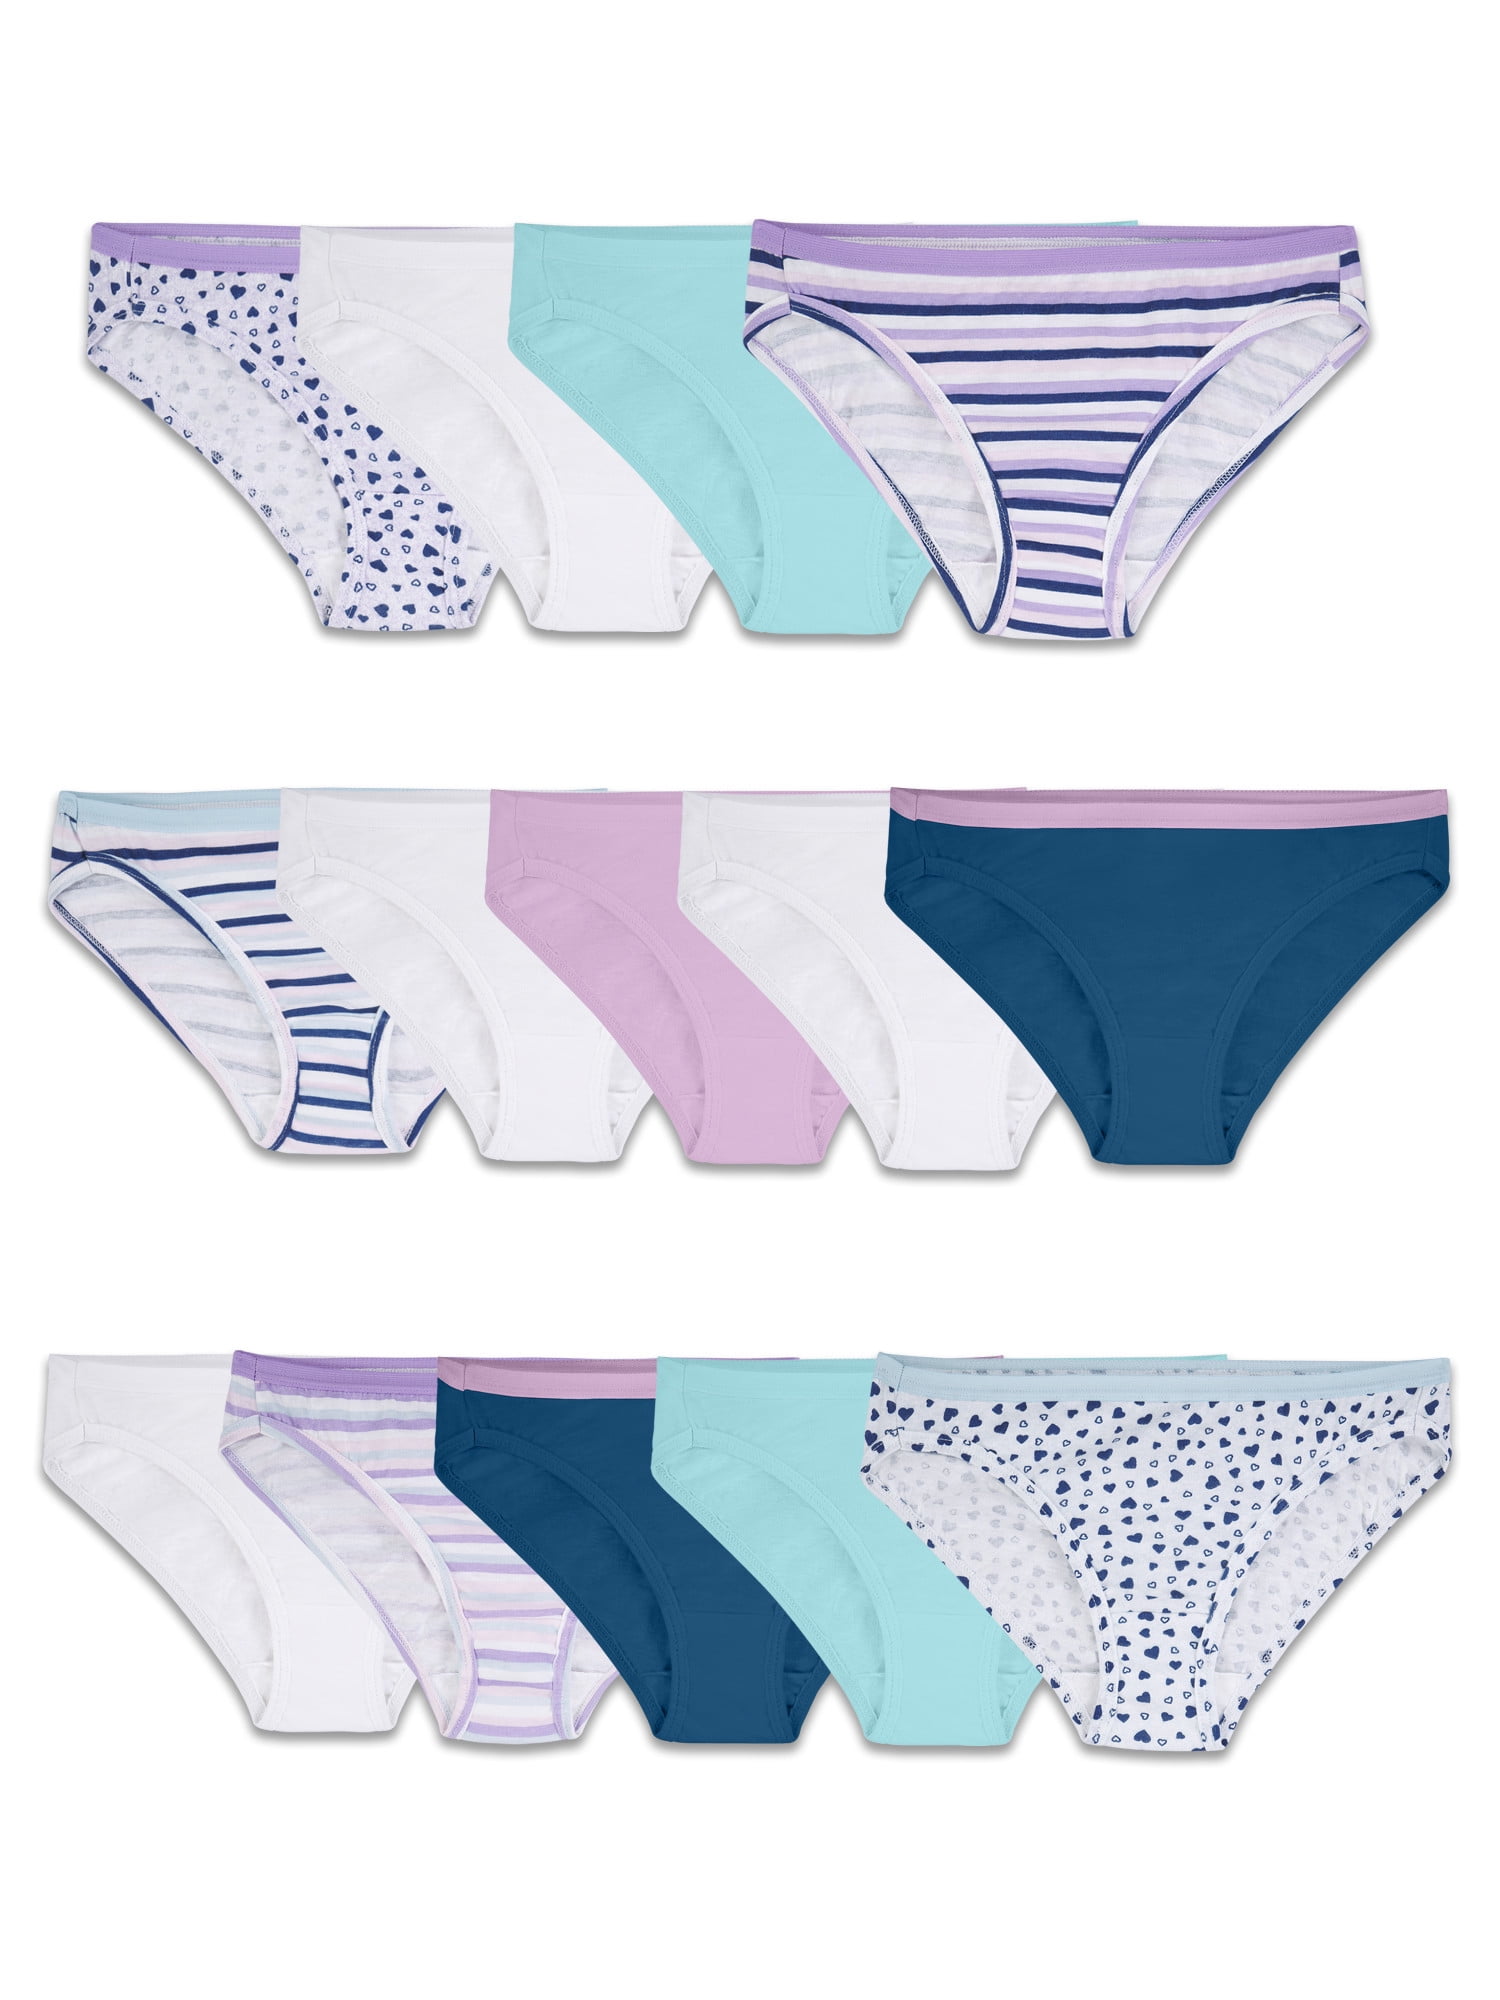 Fruit of the Loom Girls' Assorted Cotton Hipster Underwear, 10 Pack Panties  Sizes 4 - 14